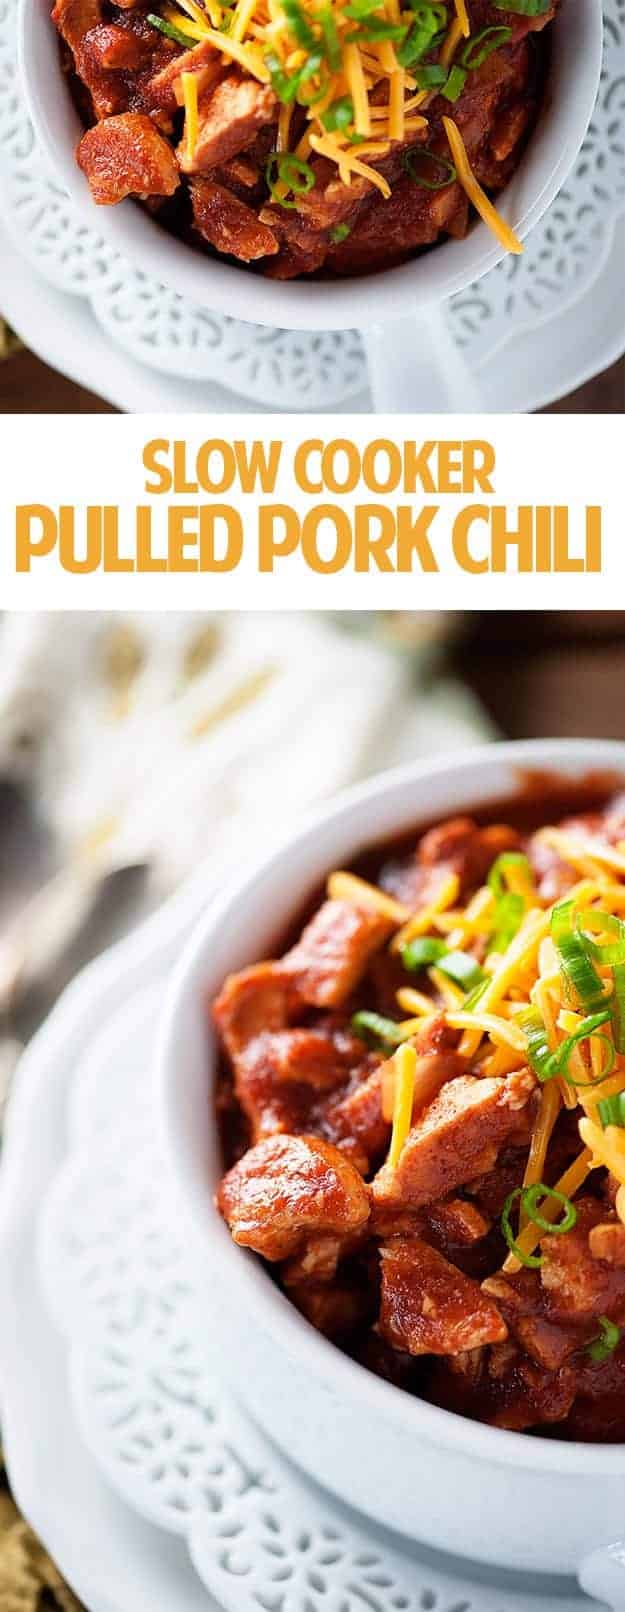 A cup of pulled pork chili on a small white plate.